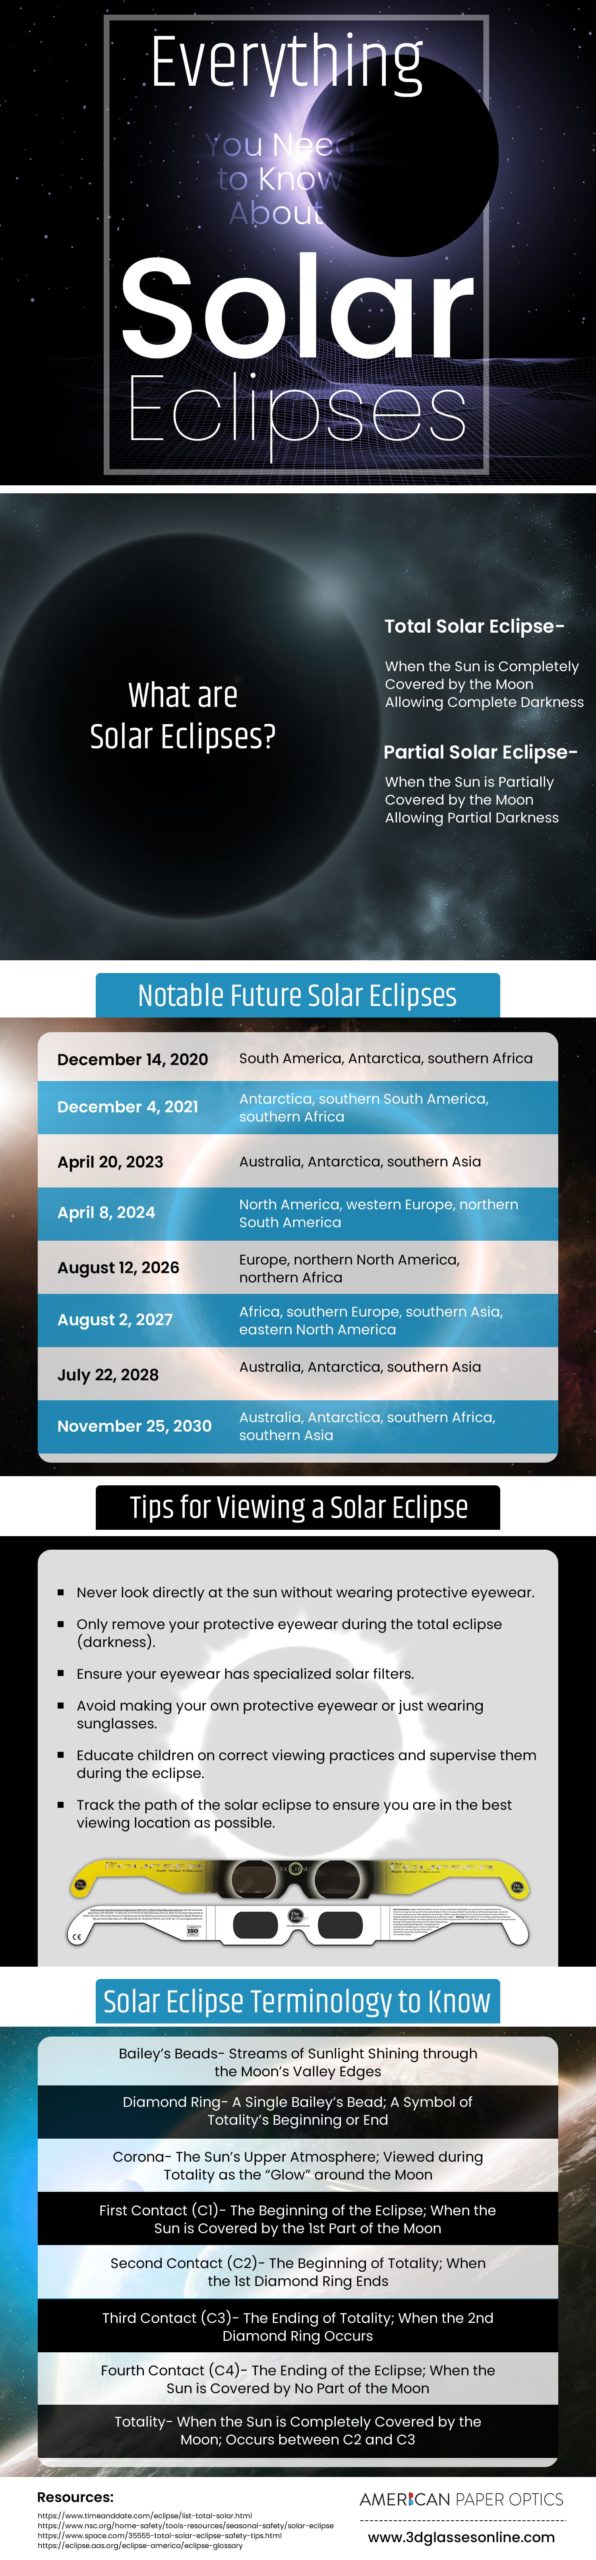 Everything You Need to Know About Solar Eclipses